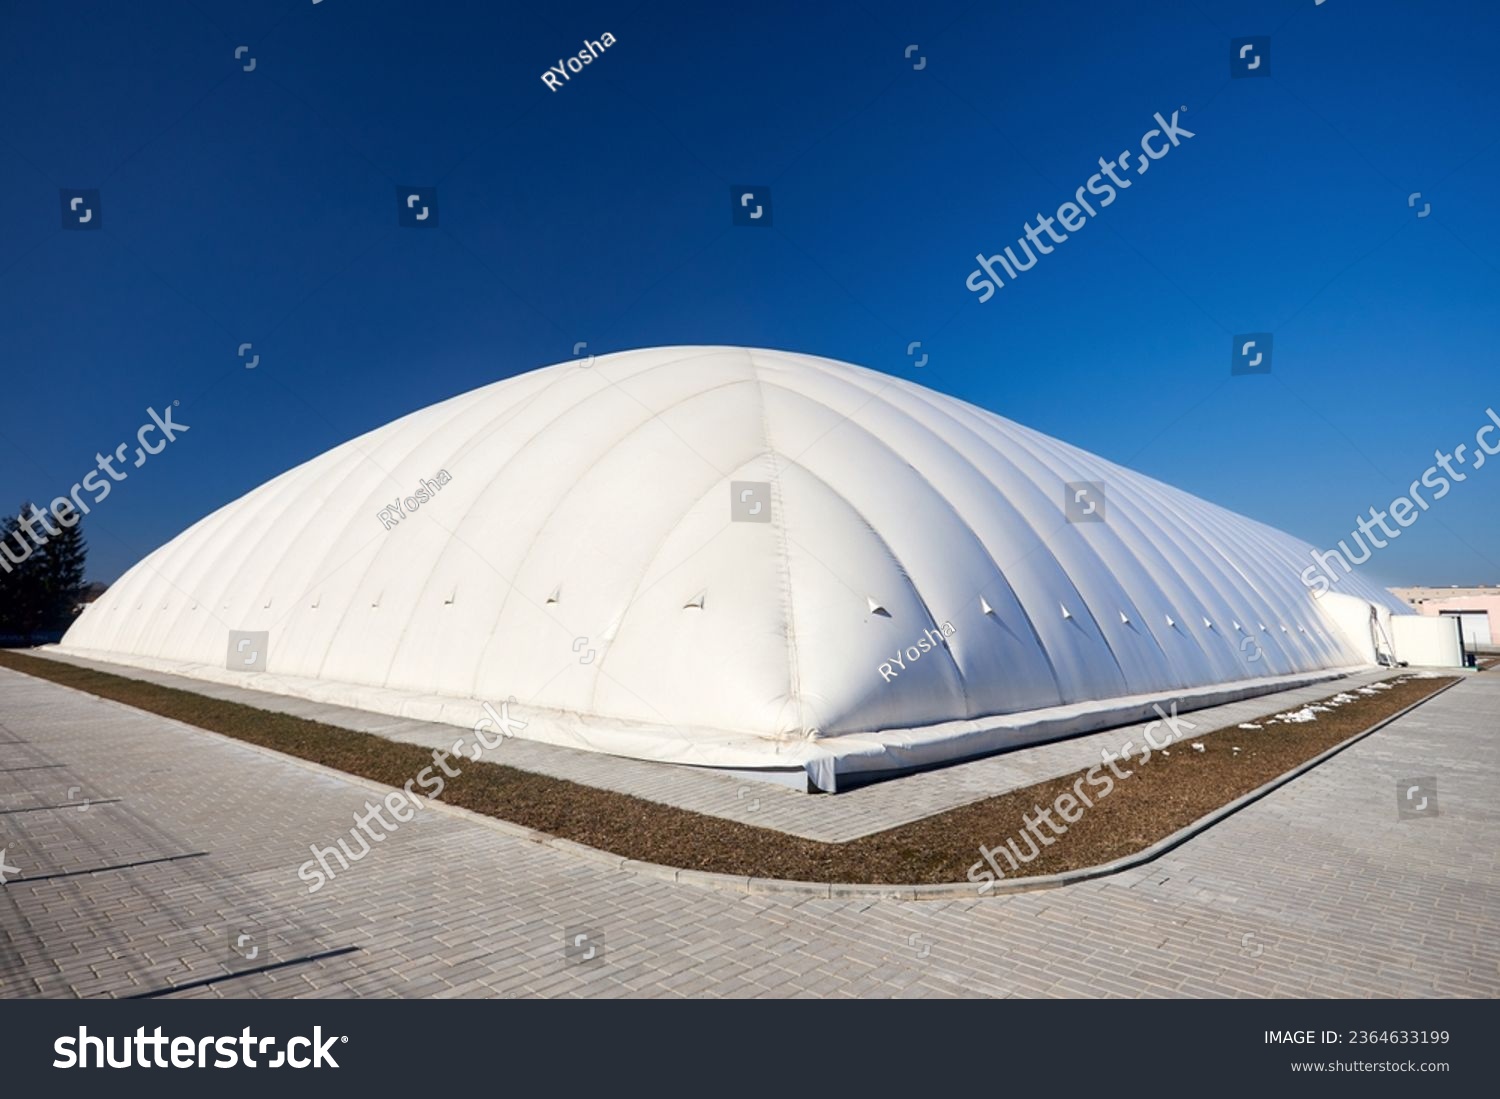 Inflatable air dome stadium. Inflated Tennis air dome or Tennis bubble arena. Modern urban architecture example as pneumatic stadium dome. #2364633199